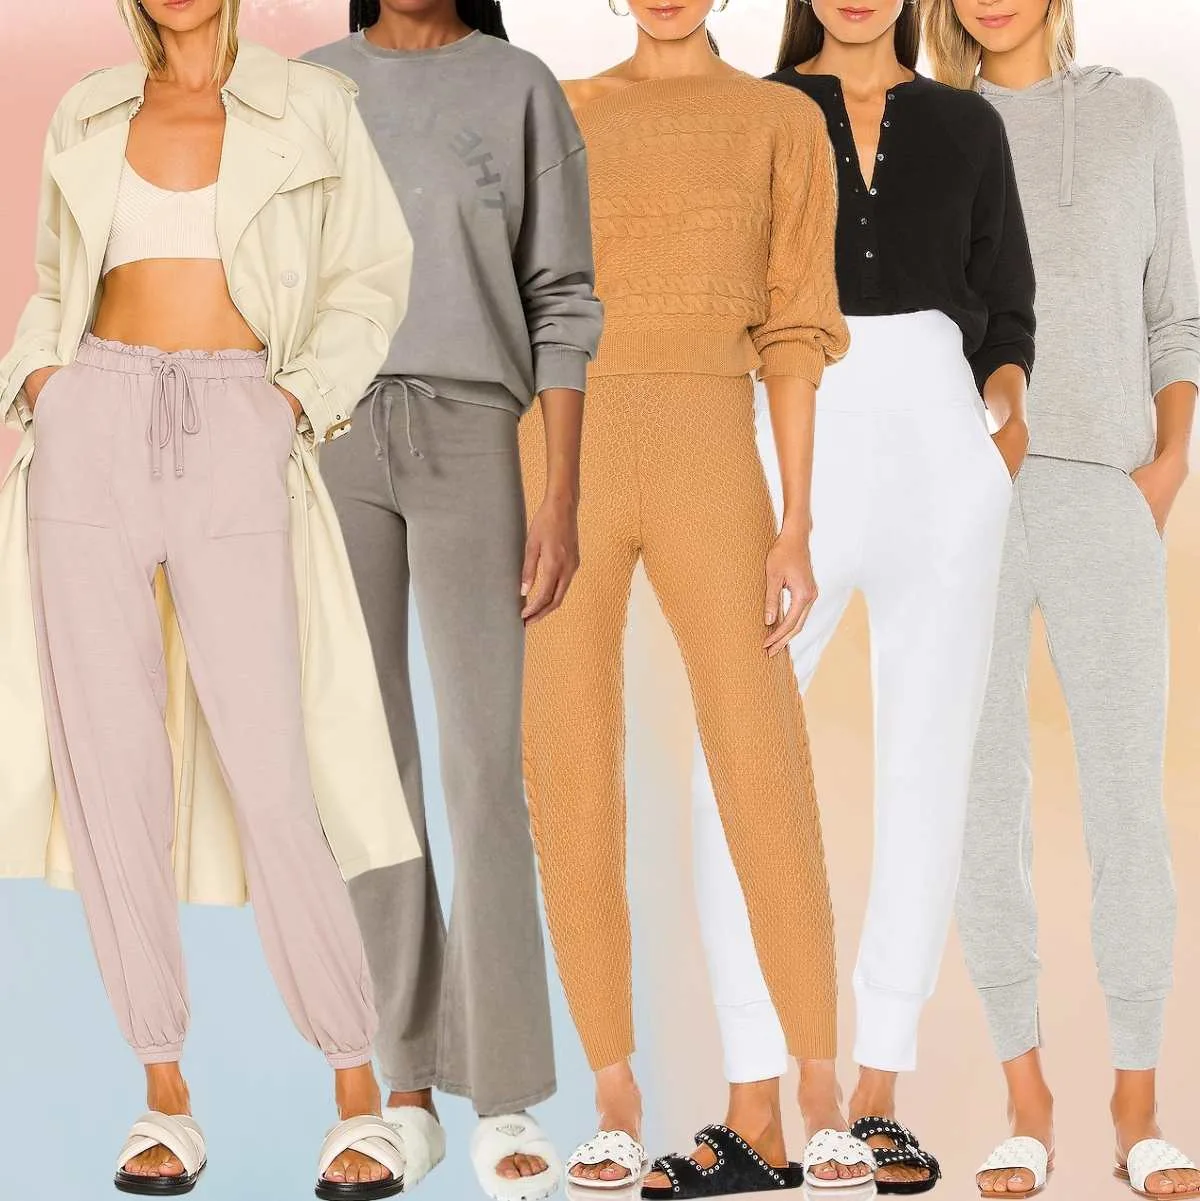 Collage of 5 women wearing different slides outfits with joggers and sweatpants.